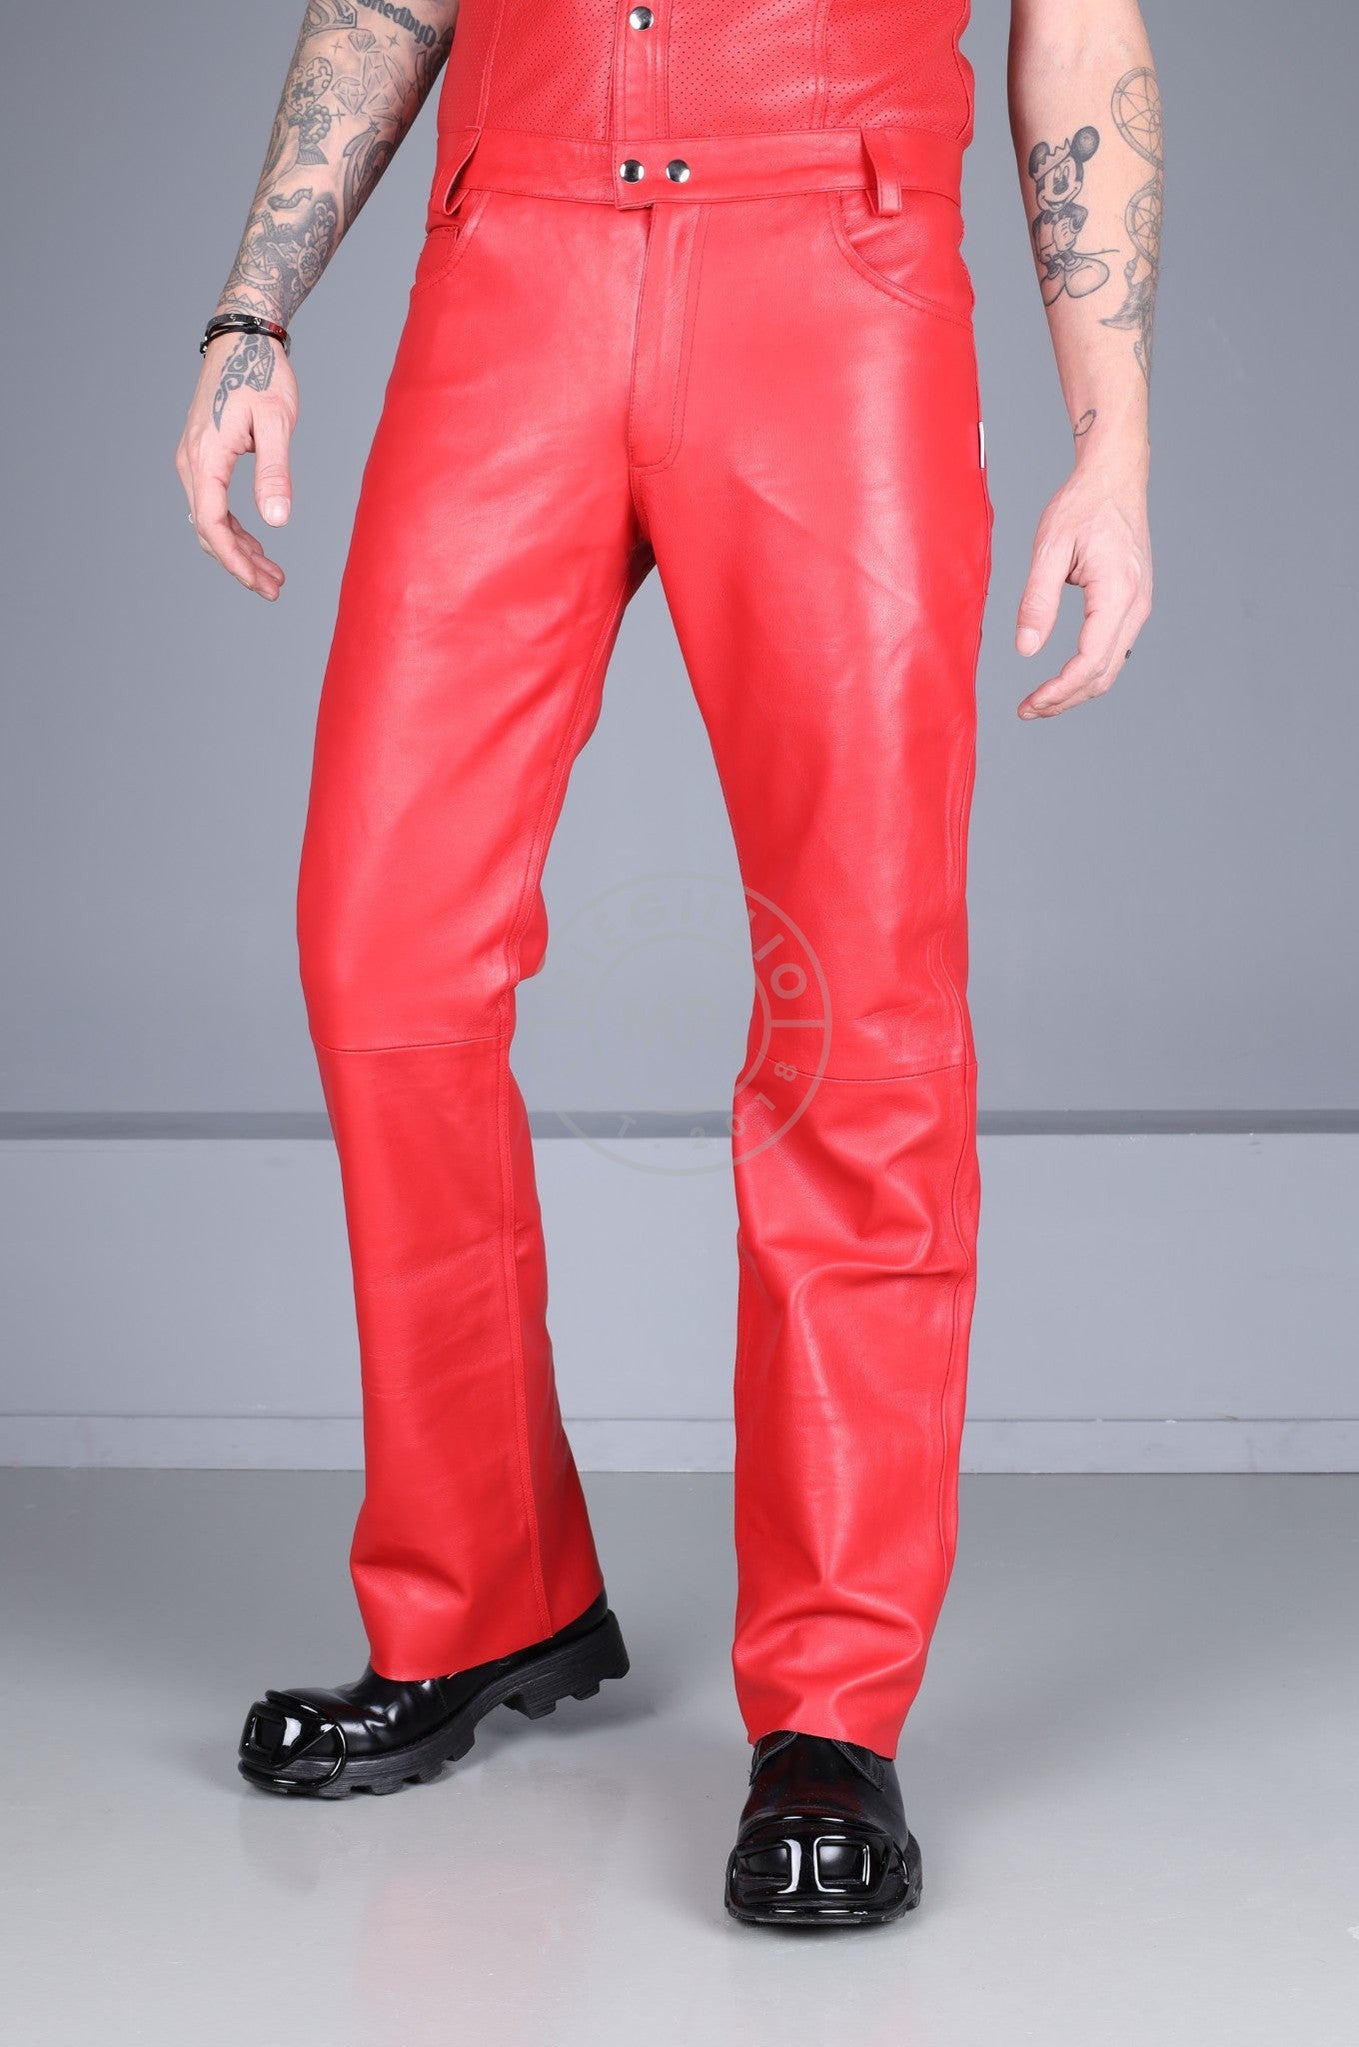 Red Leather Bootcut Pants-at MR. Riegillio